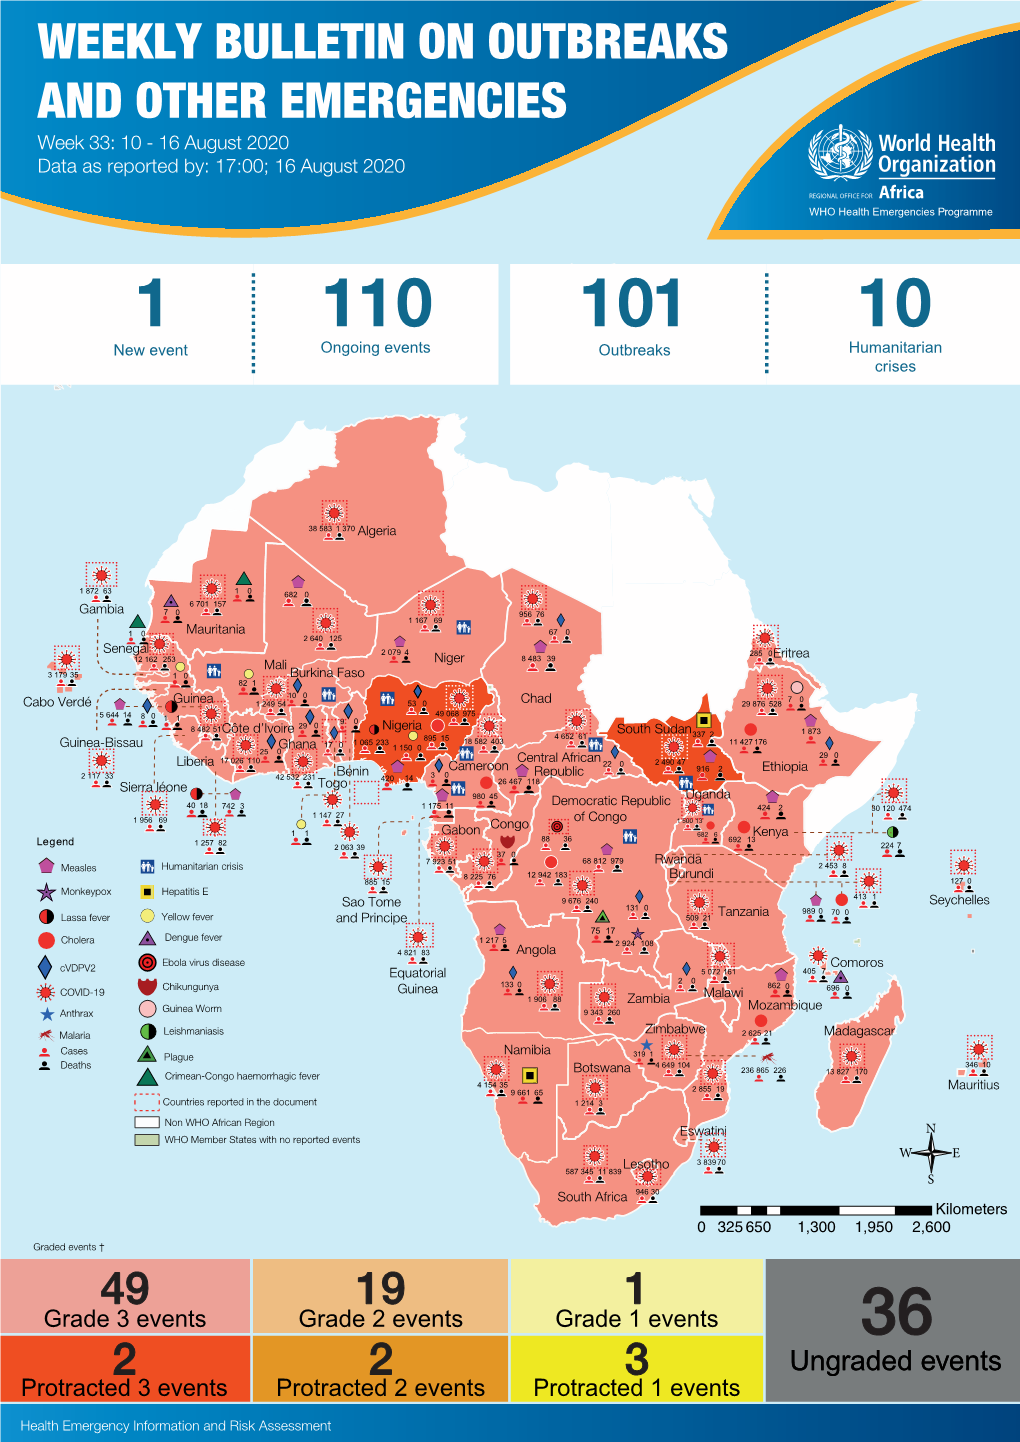 WEEKLY BULLETIN on OUTBREAKS and OTHER EMERGENCIES Week 33: 10 - 16 August 2020 Data As Reported By: 17:00; 16 August 2020